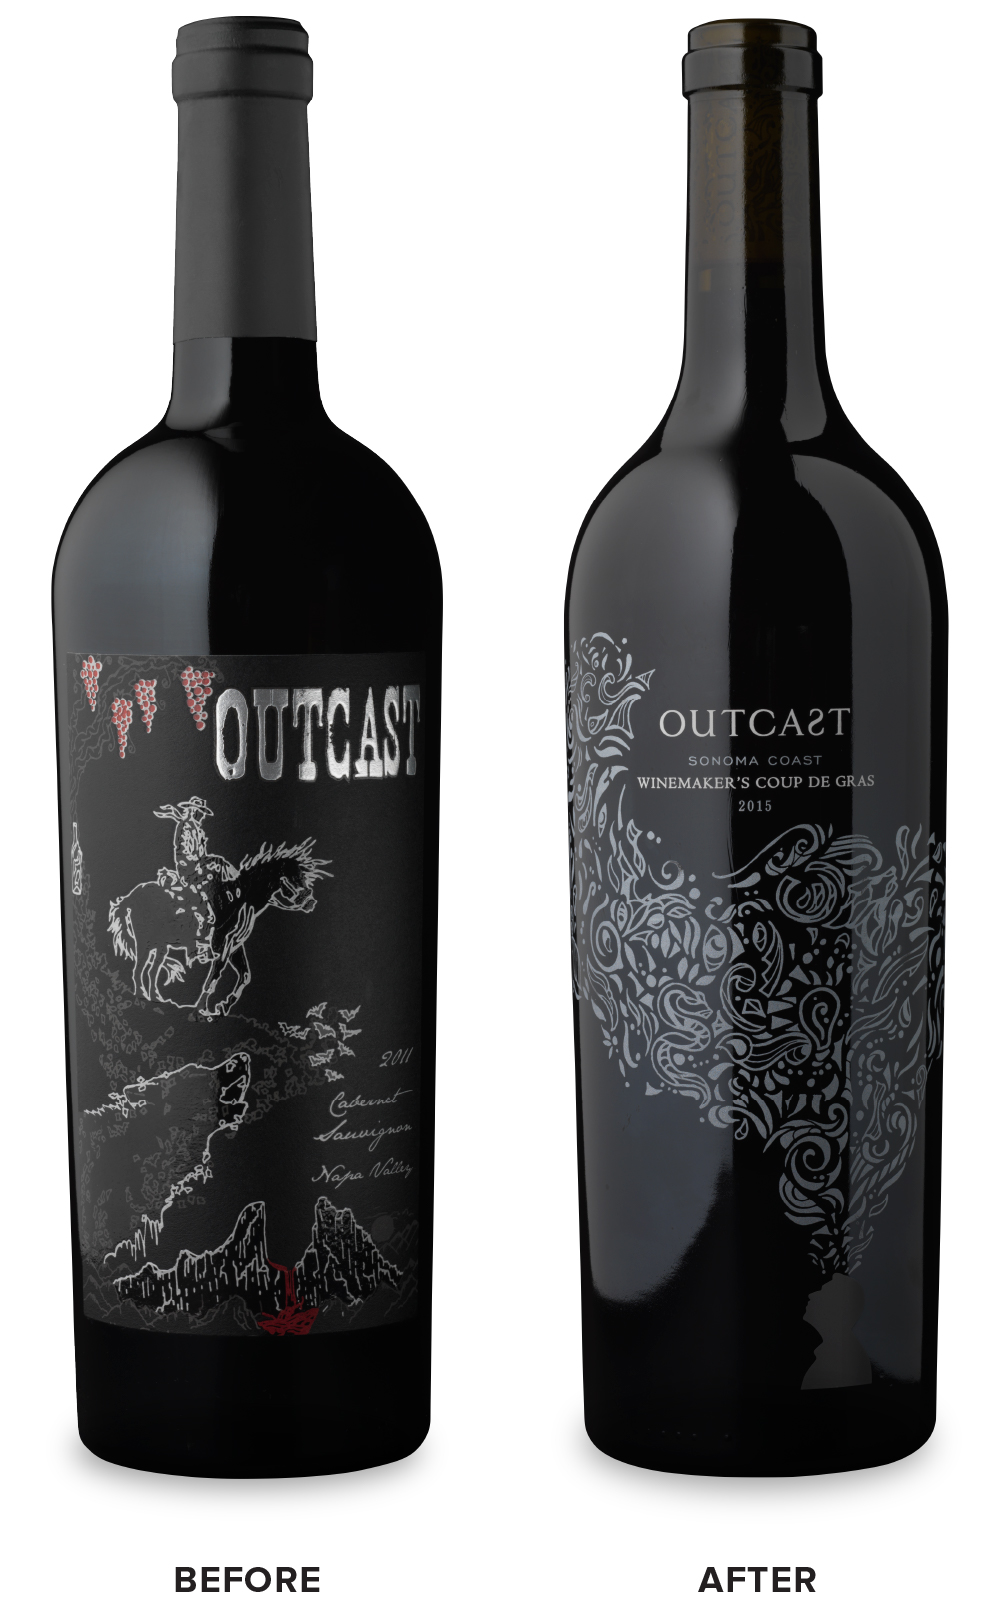 Outcast Napa Valley Wine Before Packaging Redesign on Left & After on Right